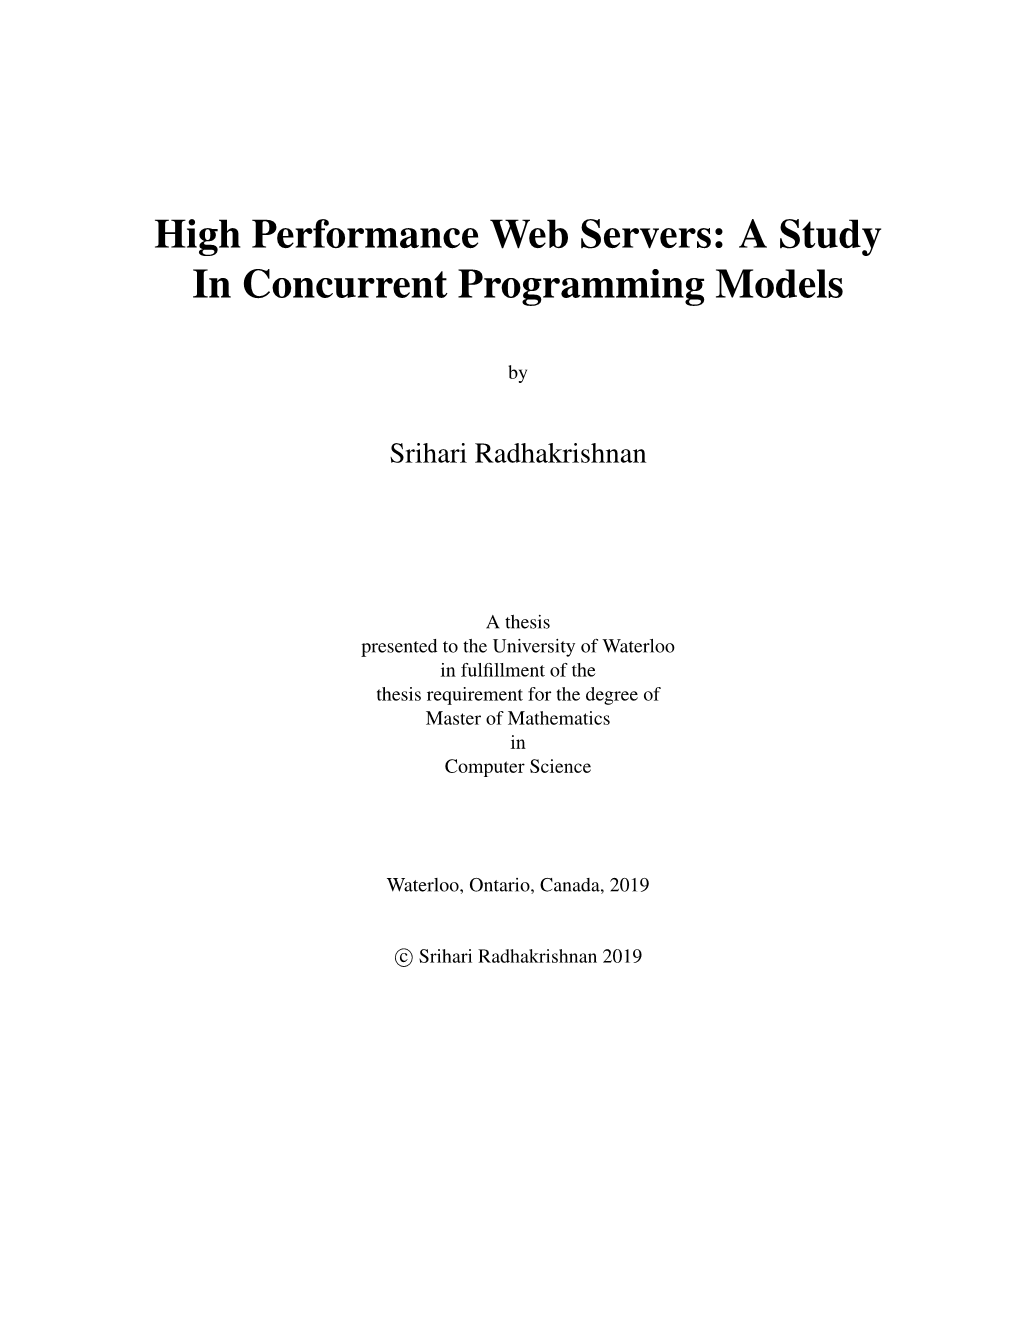 High Performance Web Servers: a Study in Concurrent Programming Models